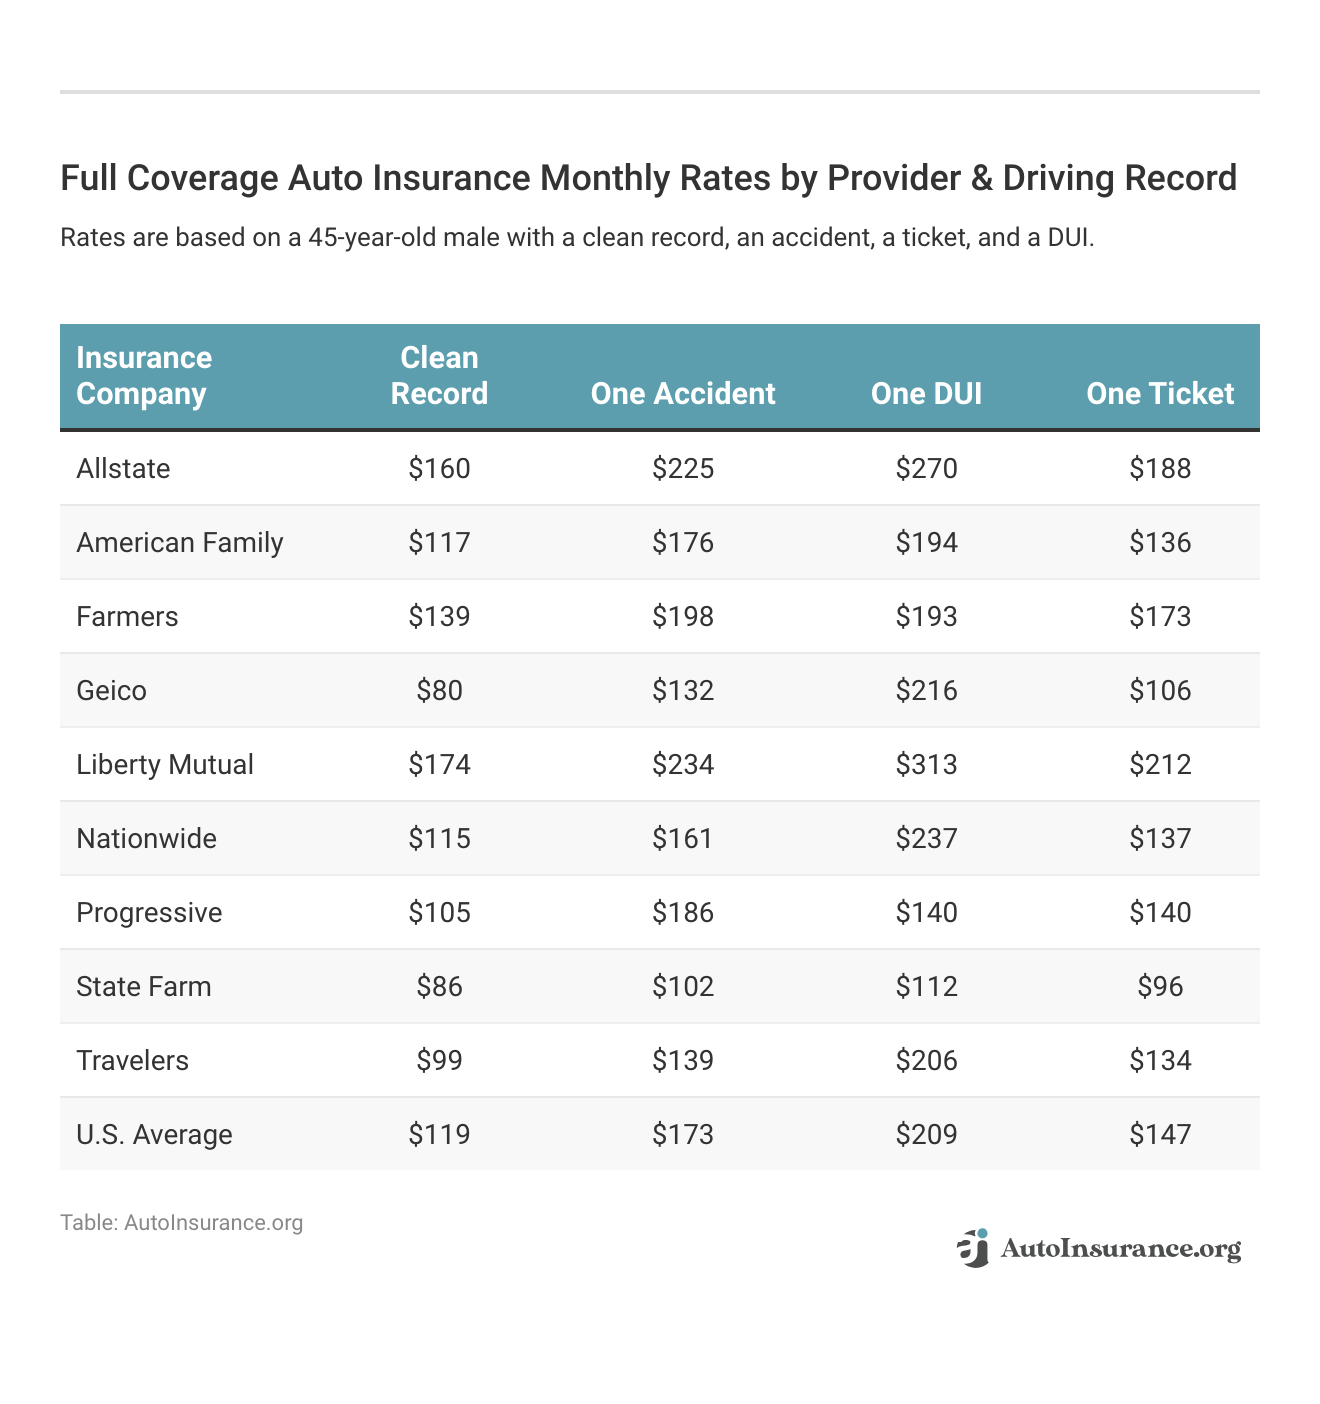 <h3>Full Coverage Auto Insurance Monthly Rates by Provider & Driving Record</h3>